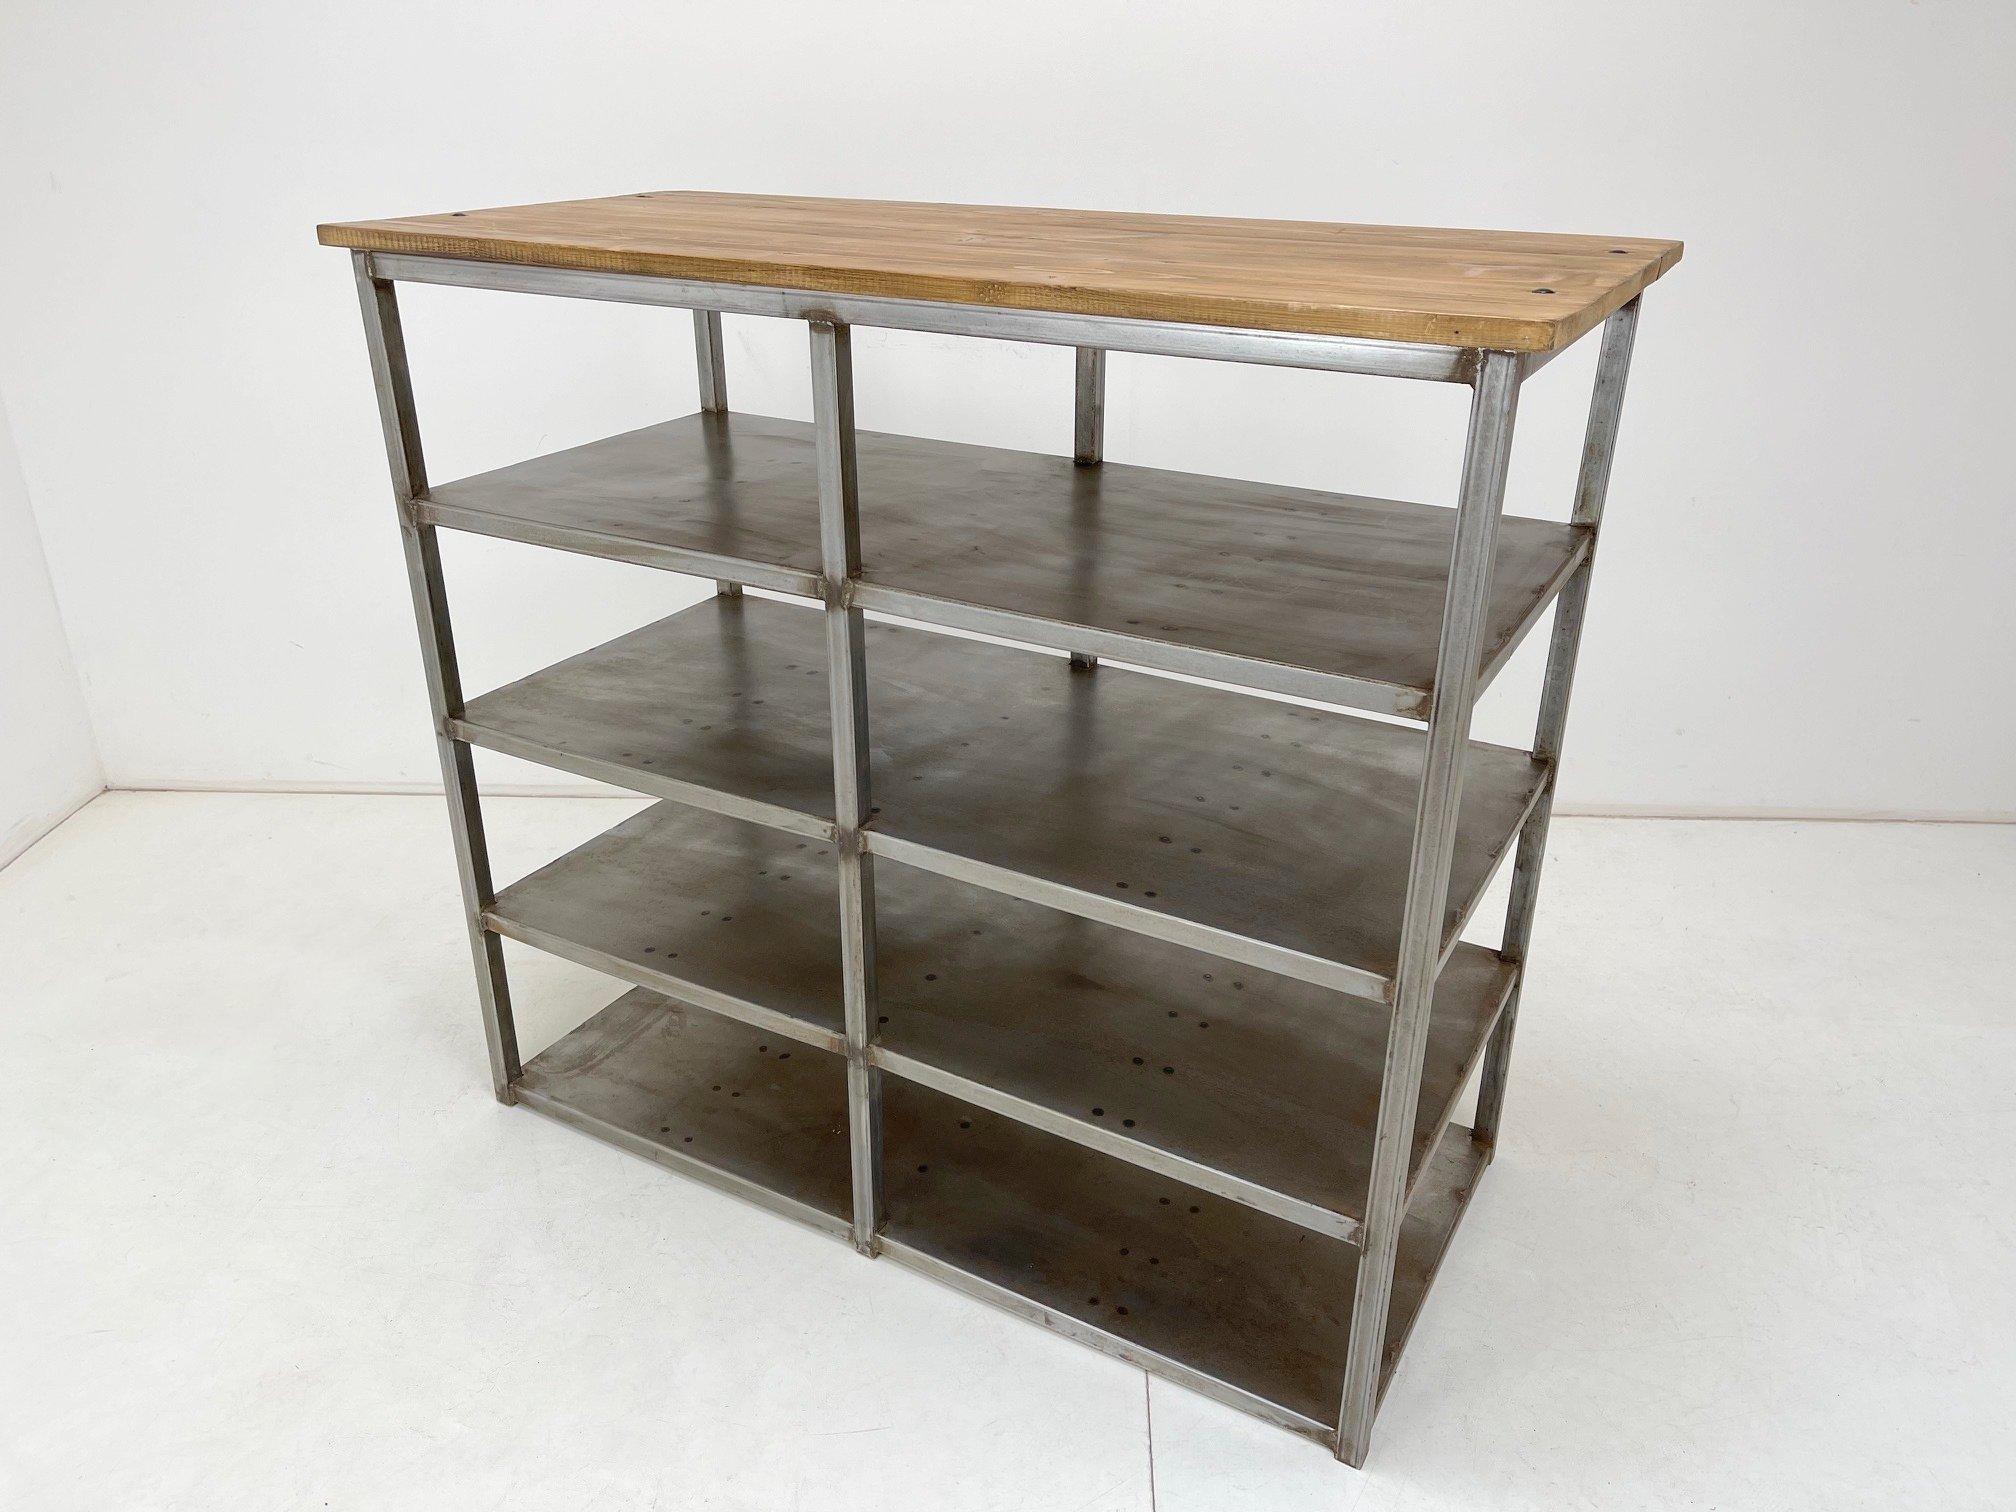 Vintage Industrial Shelf rack made of brushed steel and wood. The top wooden part was sanded and waxed.